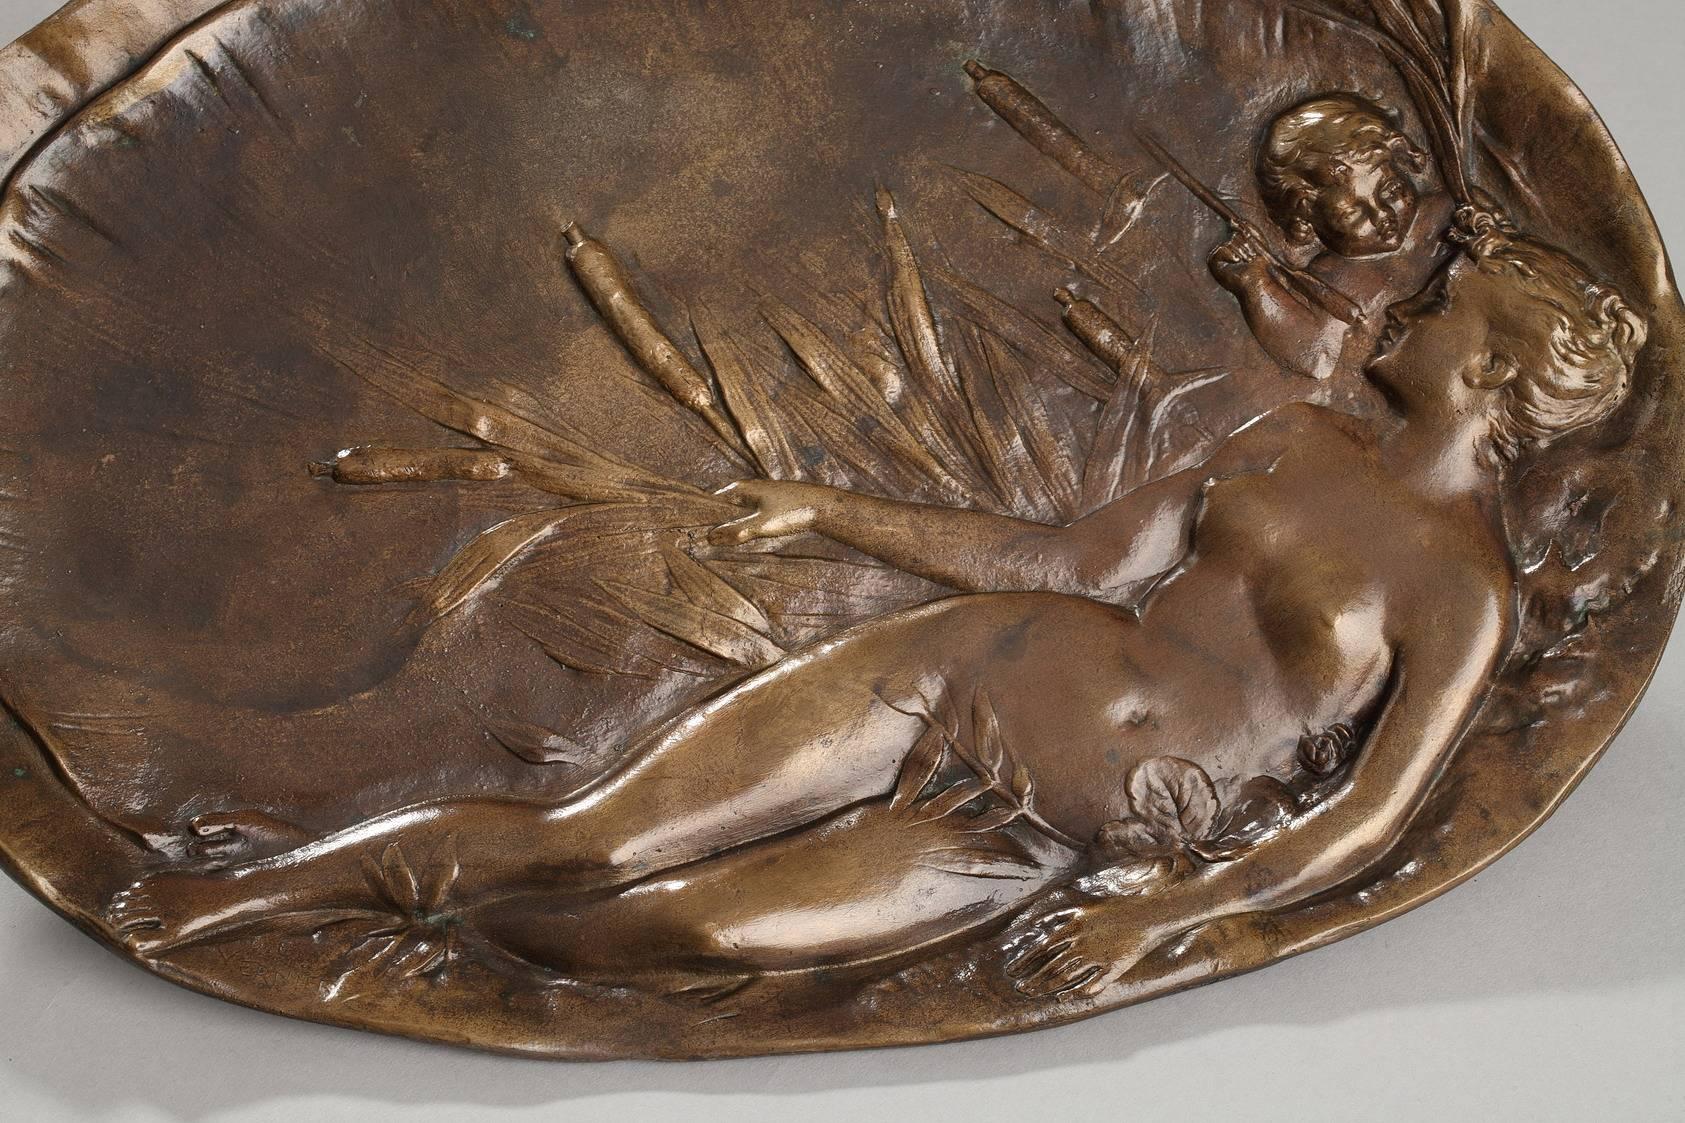 Oval platter in patinated bronze decorated with a sculpted, bas-relief woman stretched out among reeds and cattails. She is nude, and behind her, a young cupid is gazing at her face her through the reeds. This scene, saturated with the sensuality of